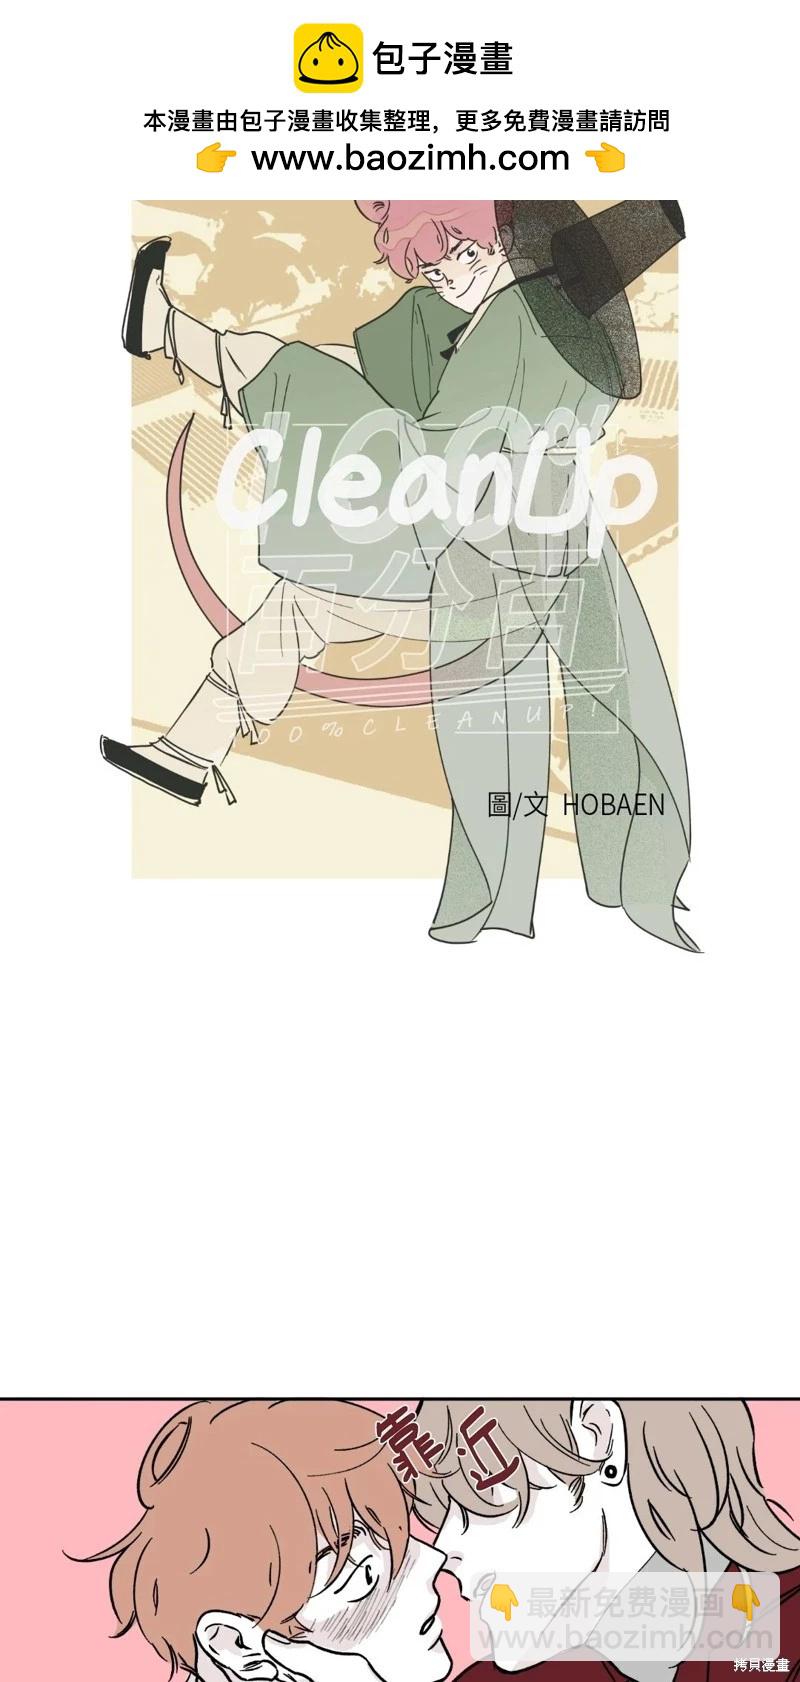 Clean Up百分百 - 第09话 - 2